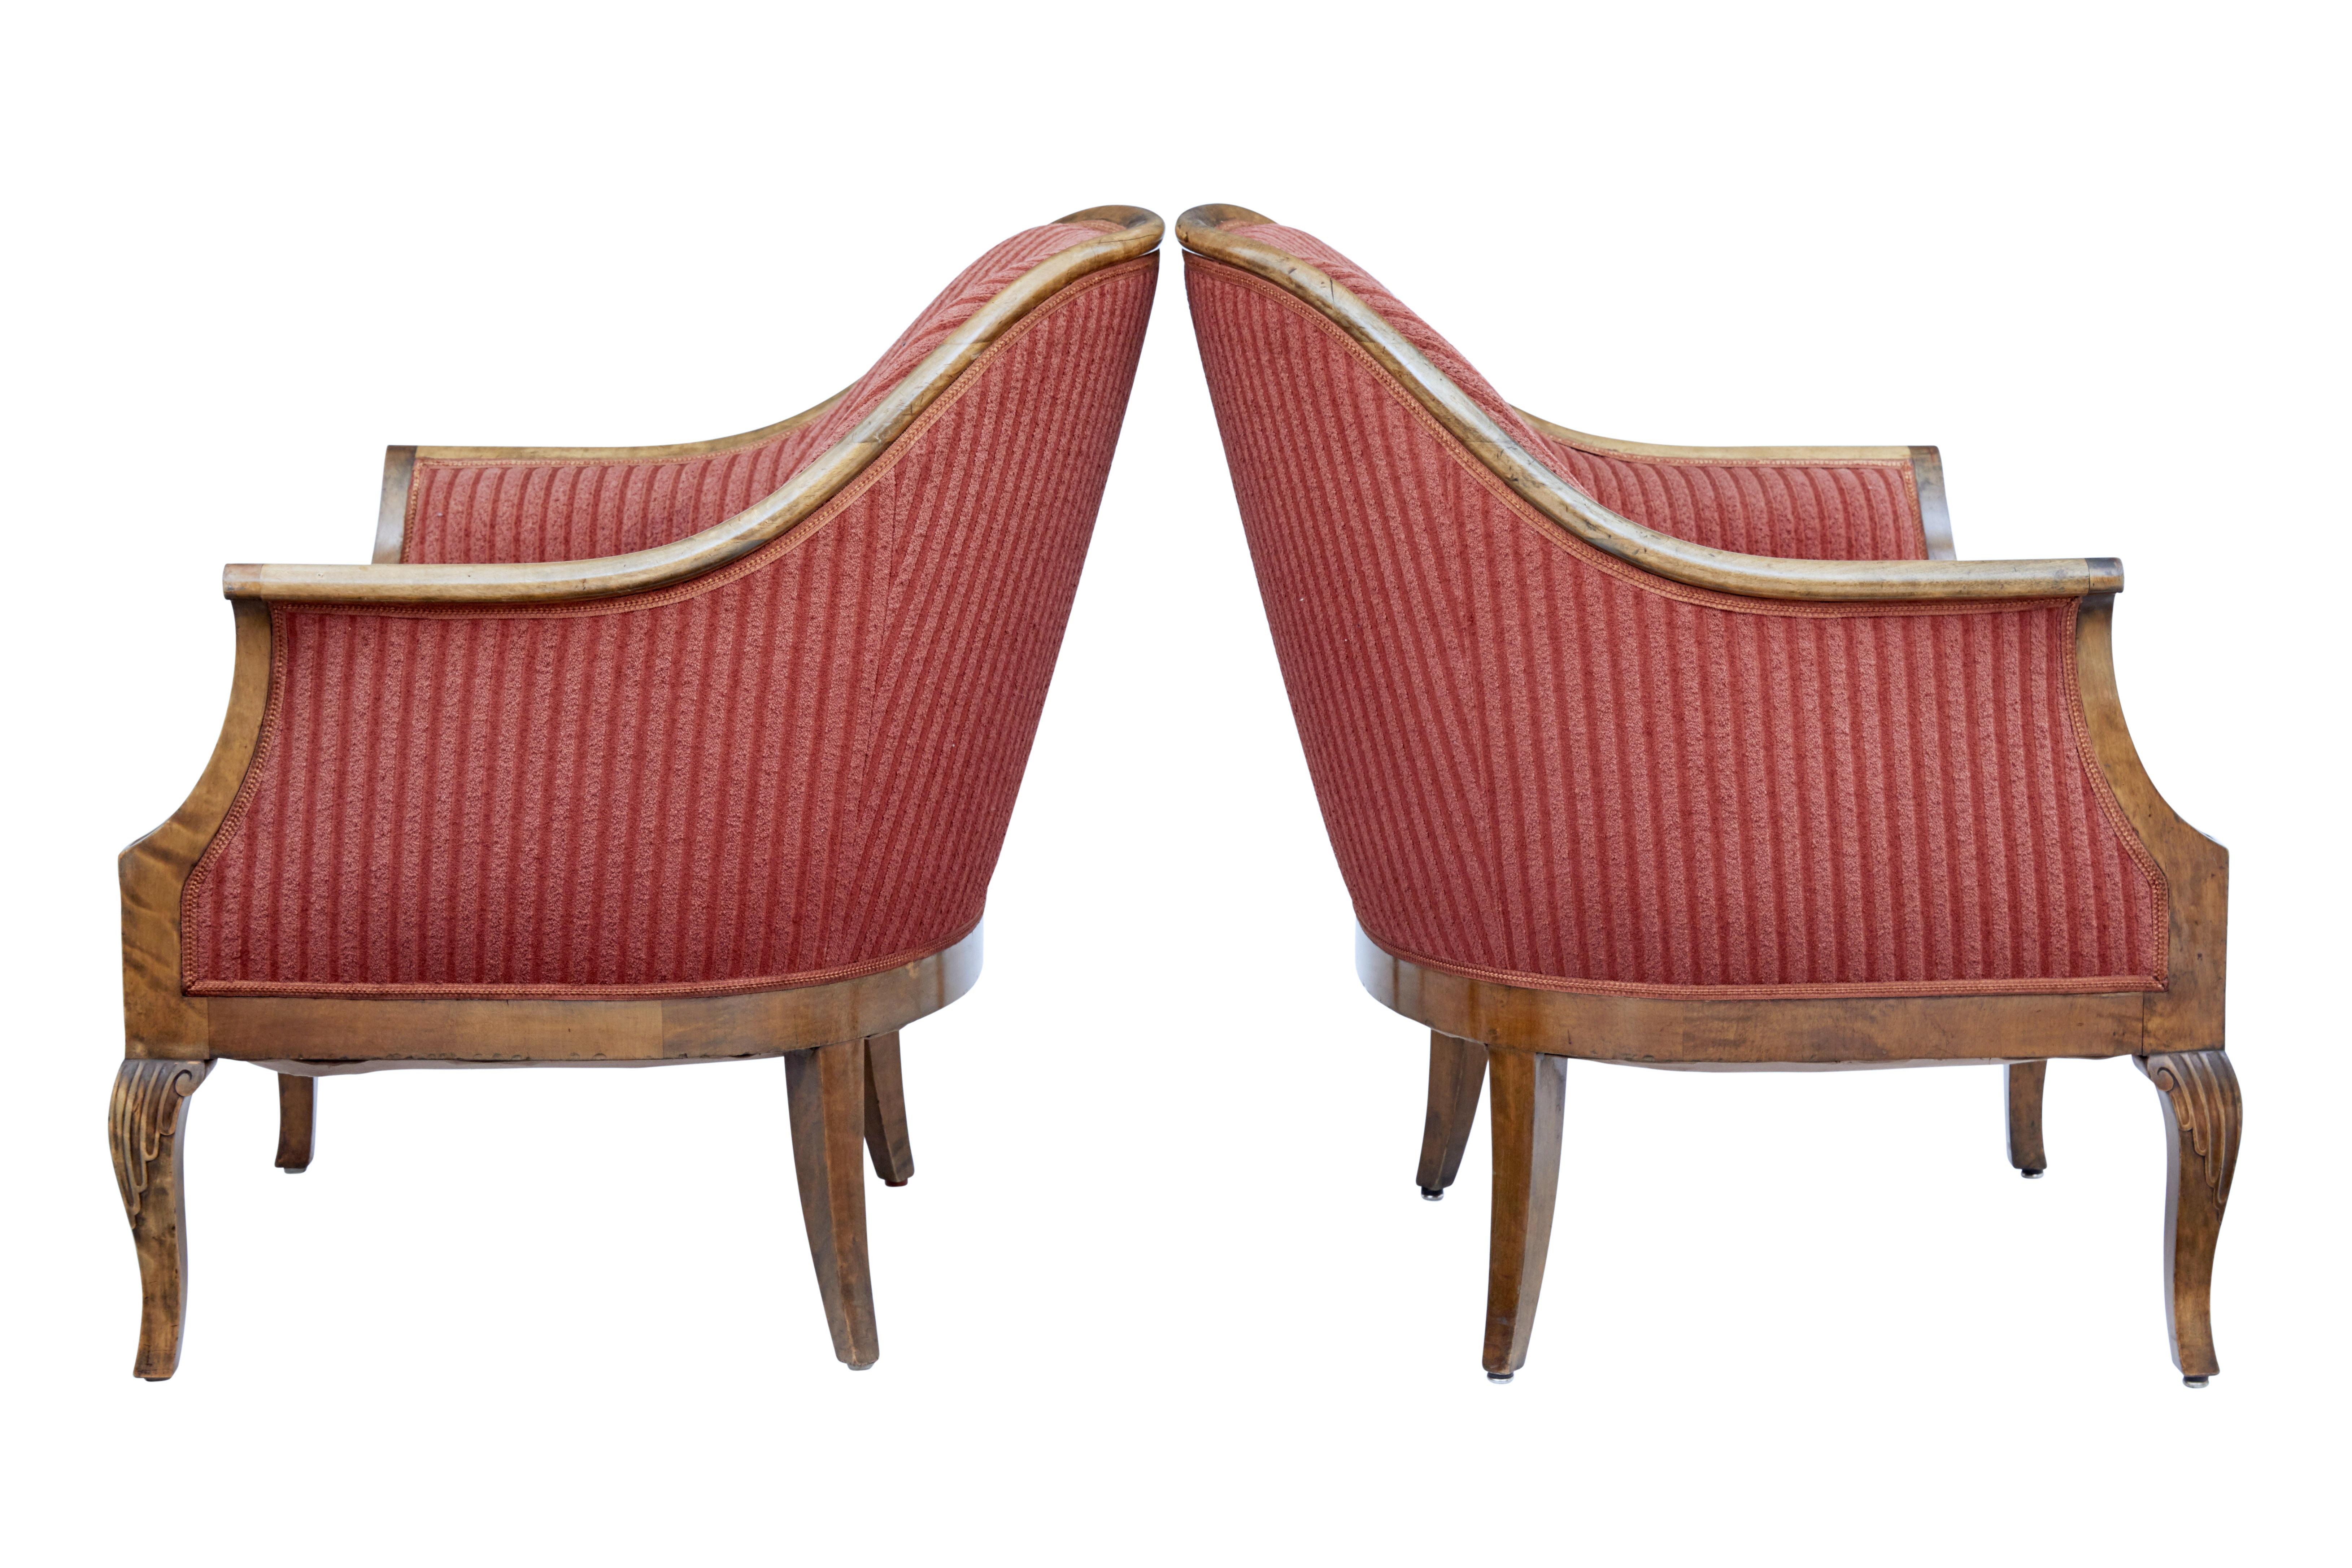 Pair of shaped back birch armchairs circa 1920.

Comfortable pair of lounge chairs which flow down from the back to the arm. Carved detail to the arm fronts and carved shell design to the knee of the front leg.

Tapered back legs.

Minor